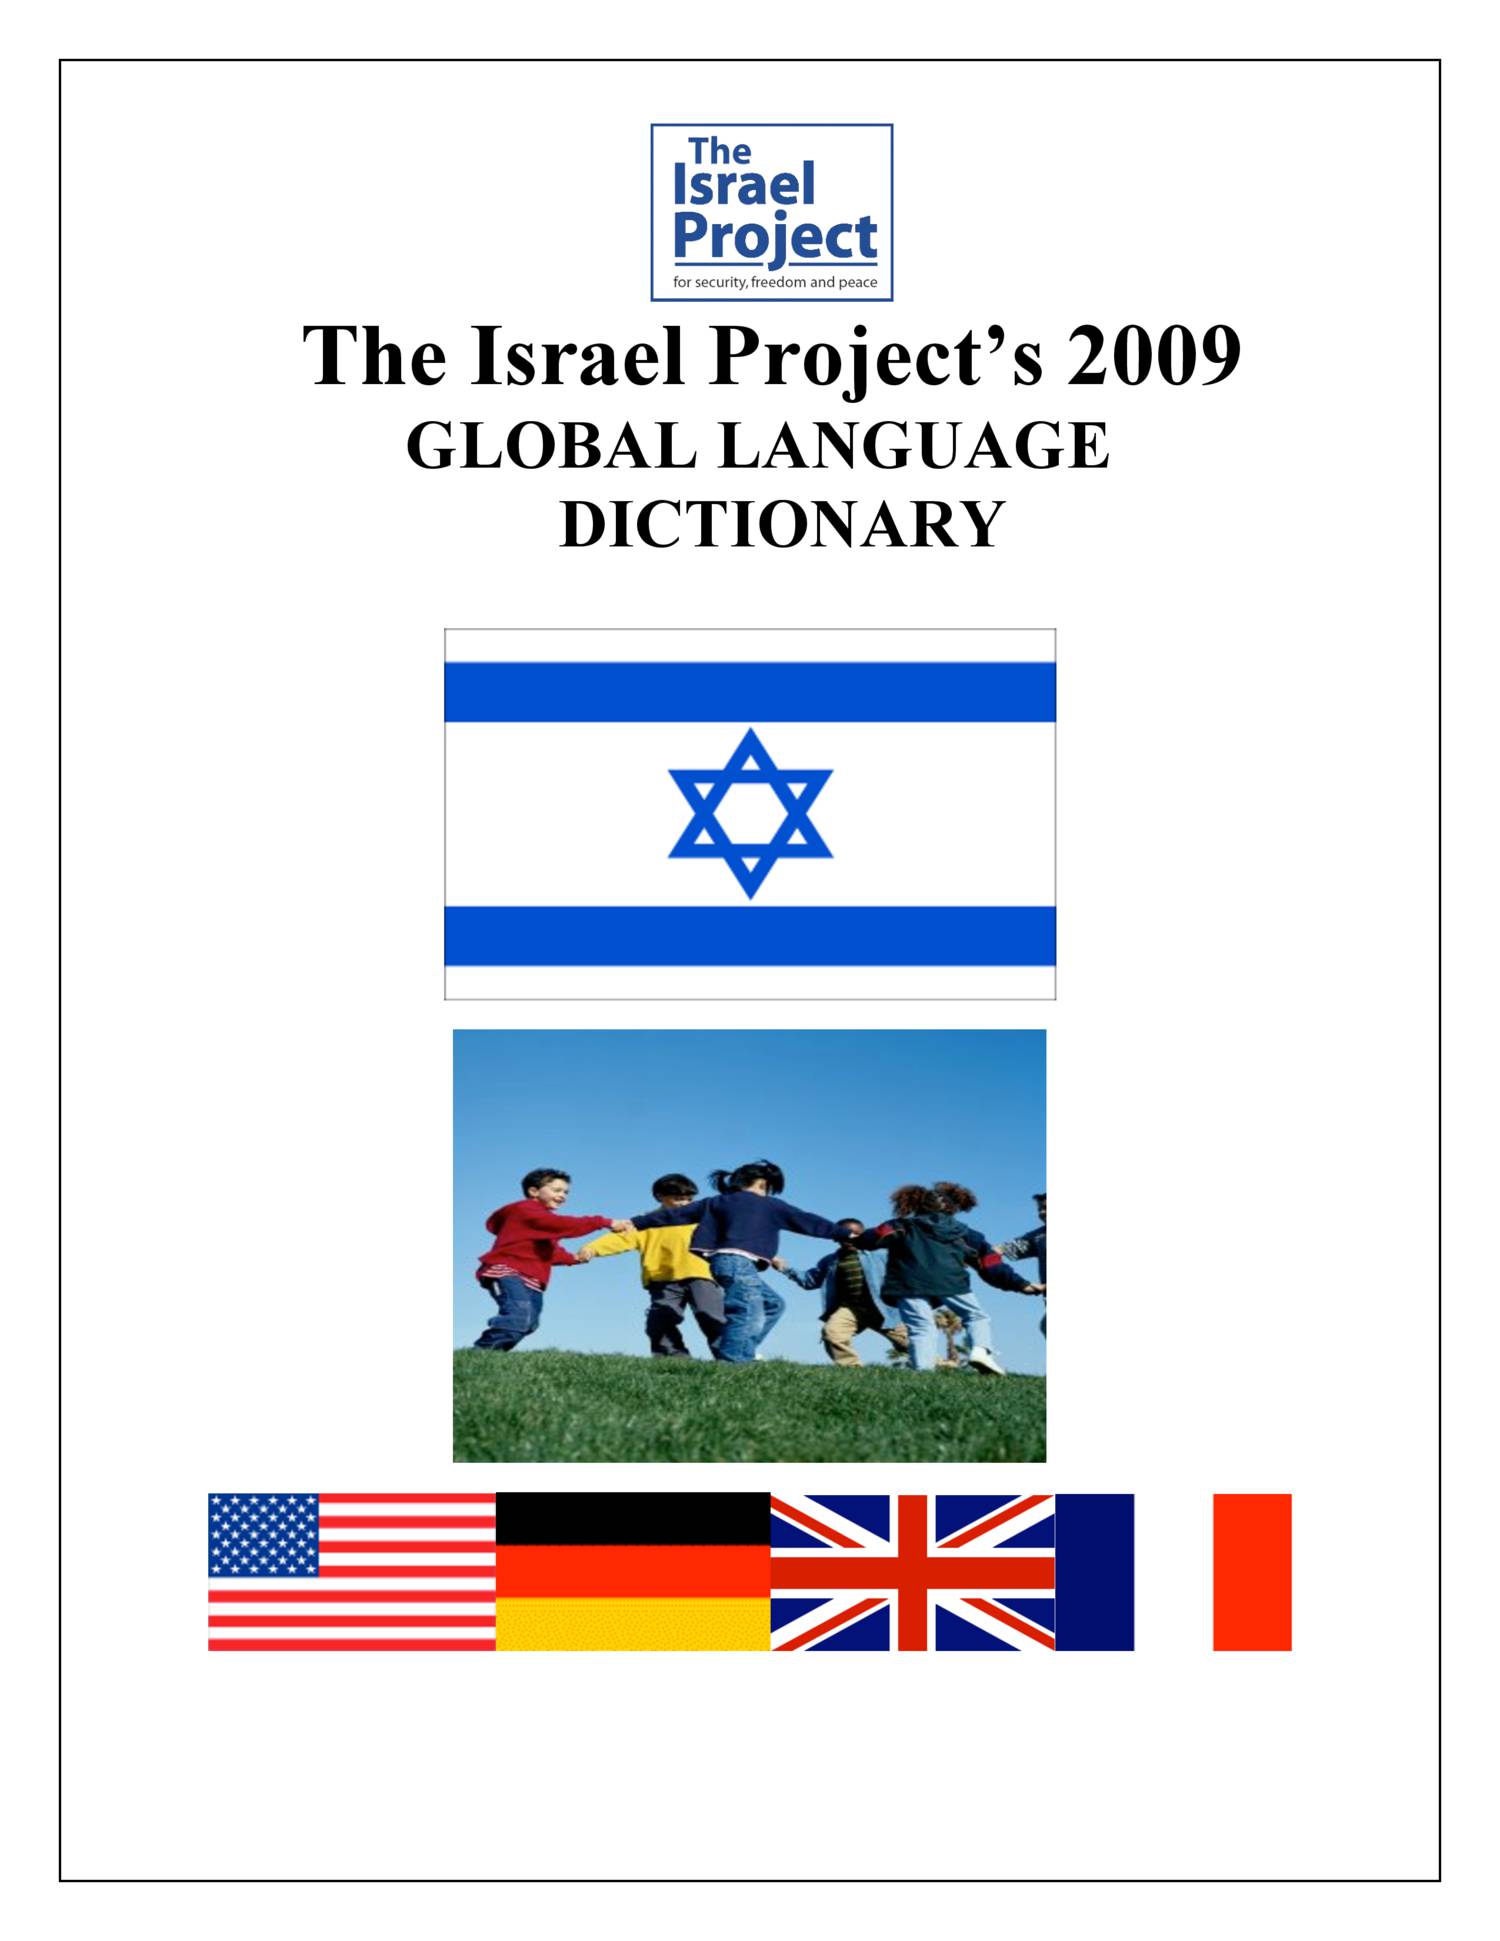 The Luntz report - The Israel Projects 2009 Global Language Dictionary.pdf  | DocDroid